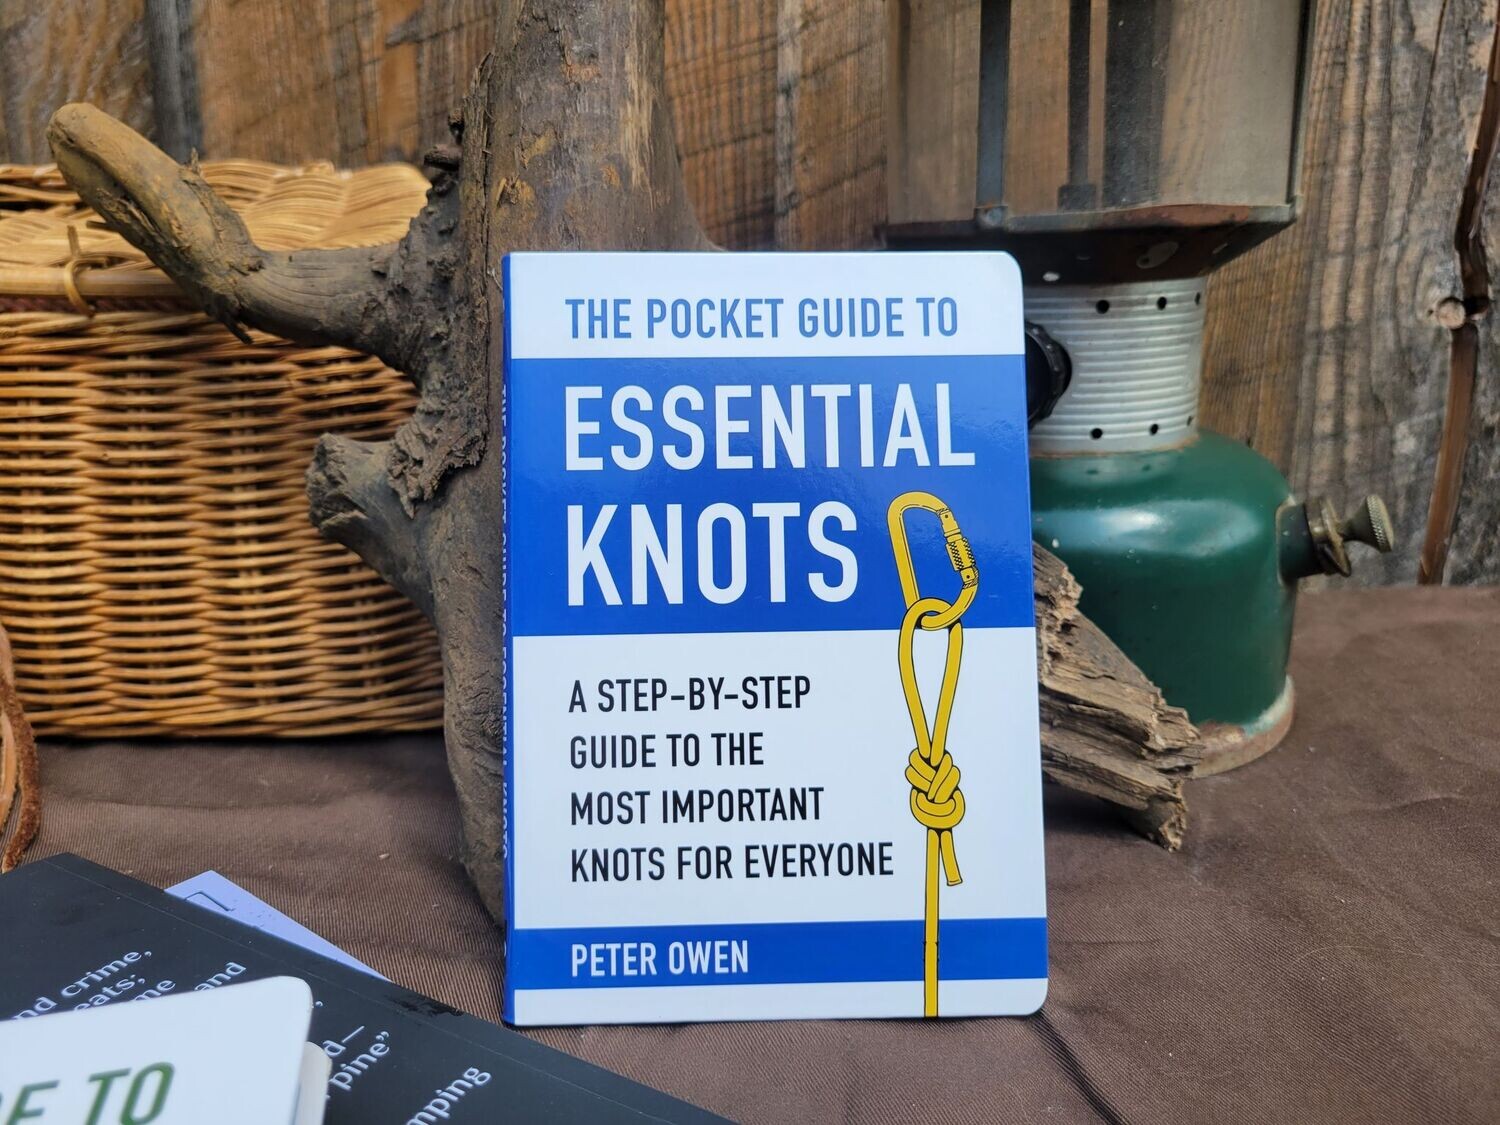 The Pocket Guide to Essential Knots by Peter Owen